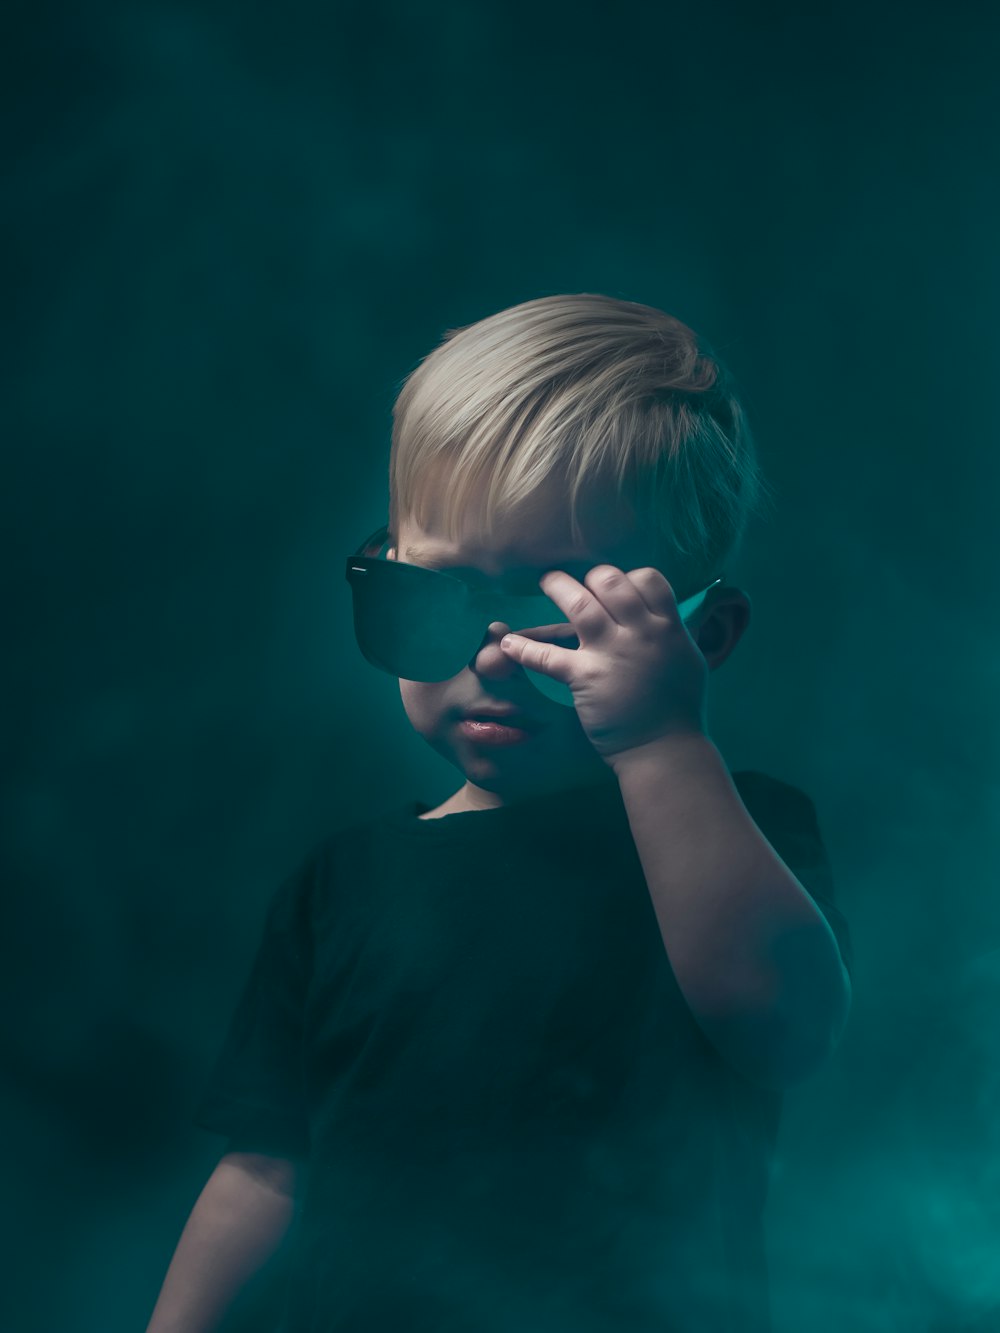 1500+ Cool Boy Pictures | Download Free Images on Unsplash